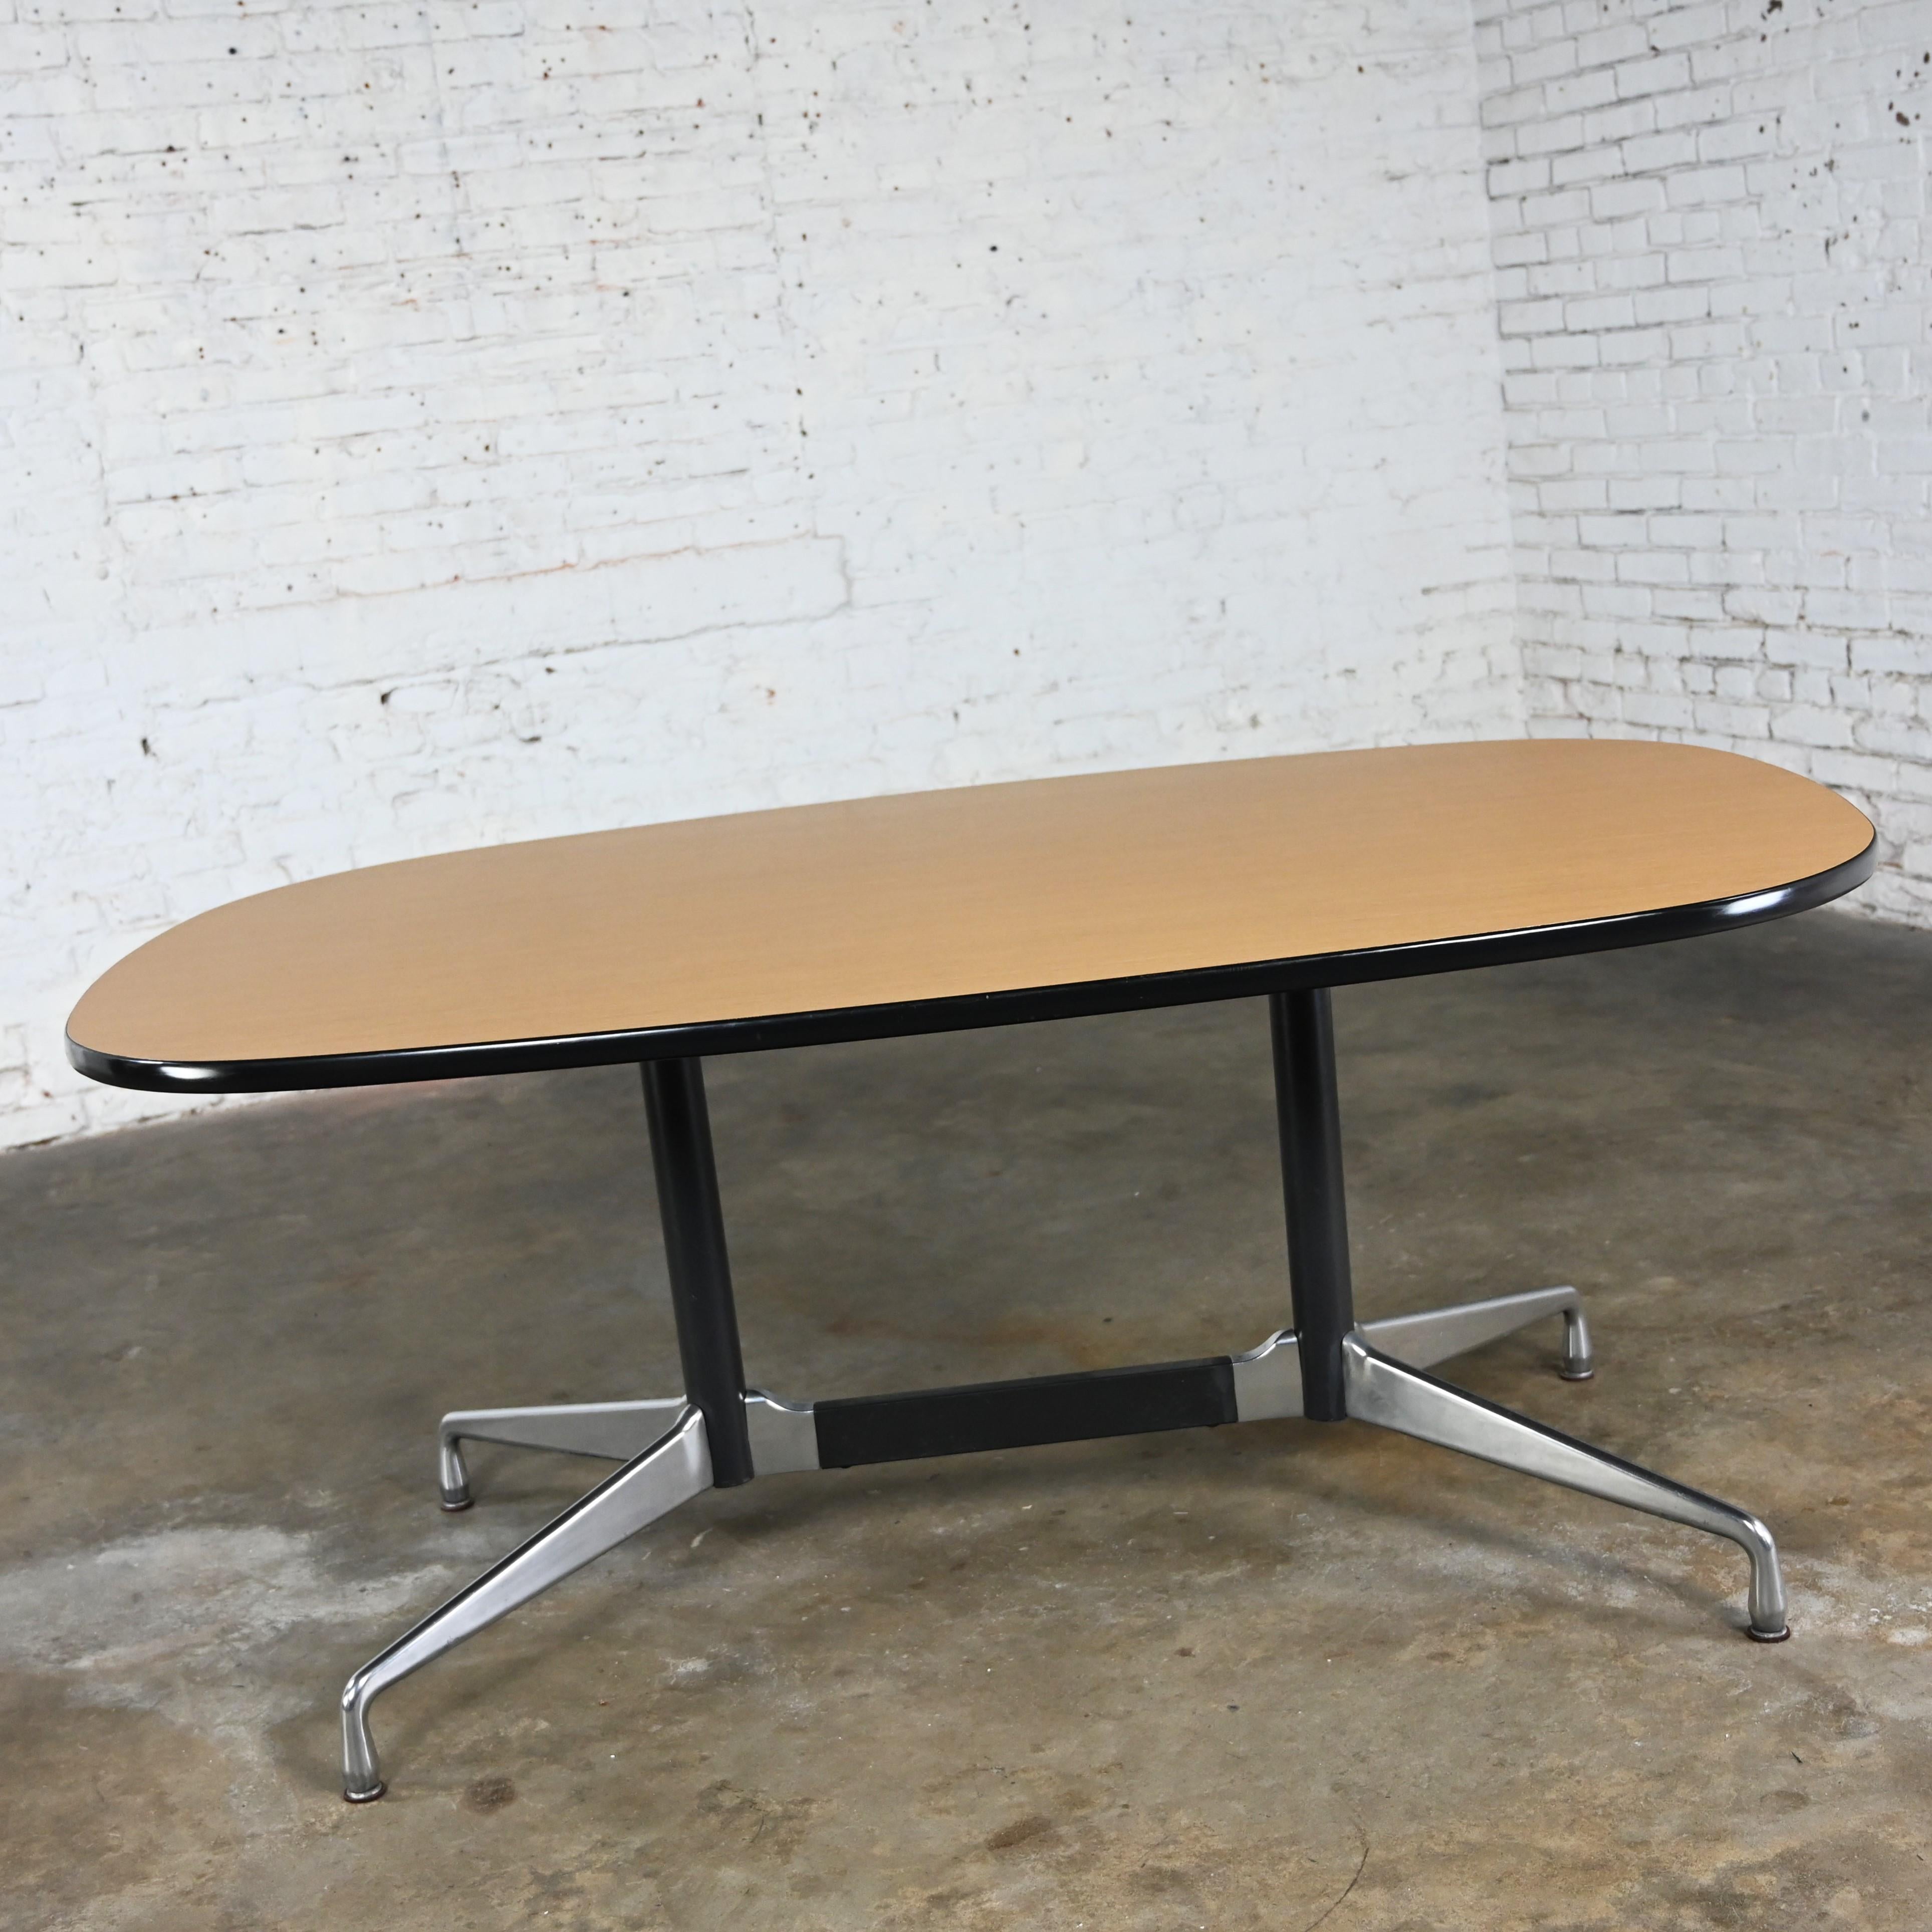 Fabulous vintage MCM (Mid-Century Modern) Eames for Herman Miller racetrack oval conference or dining table with a black & aluminum universal segmented base and blonde laminate top with black vinyl edge banding. Beautiful condition, keeping in mind